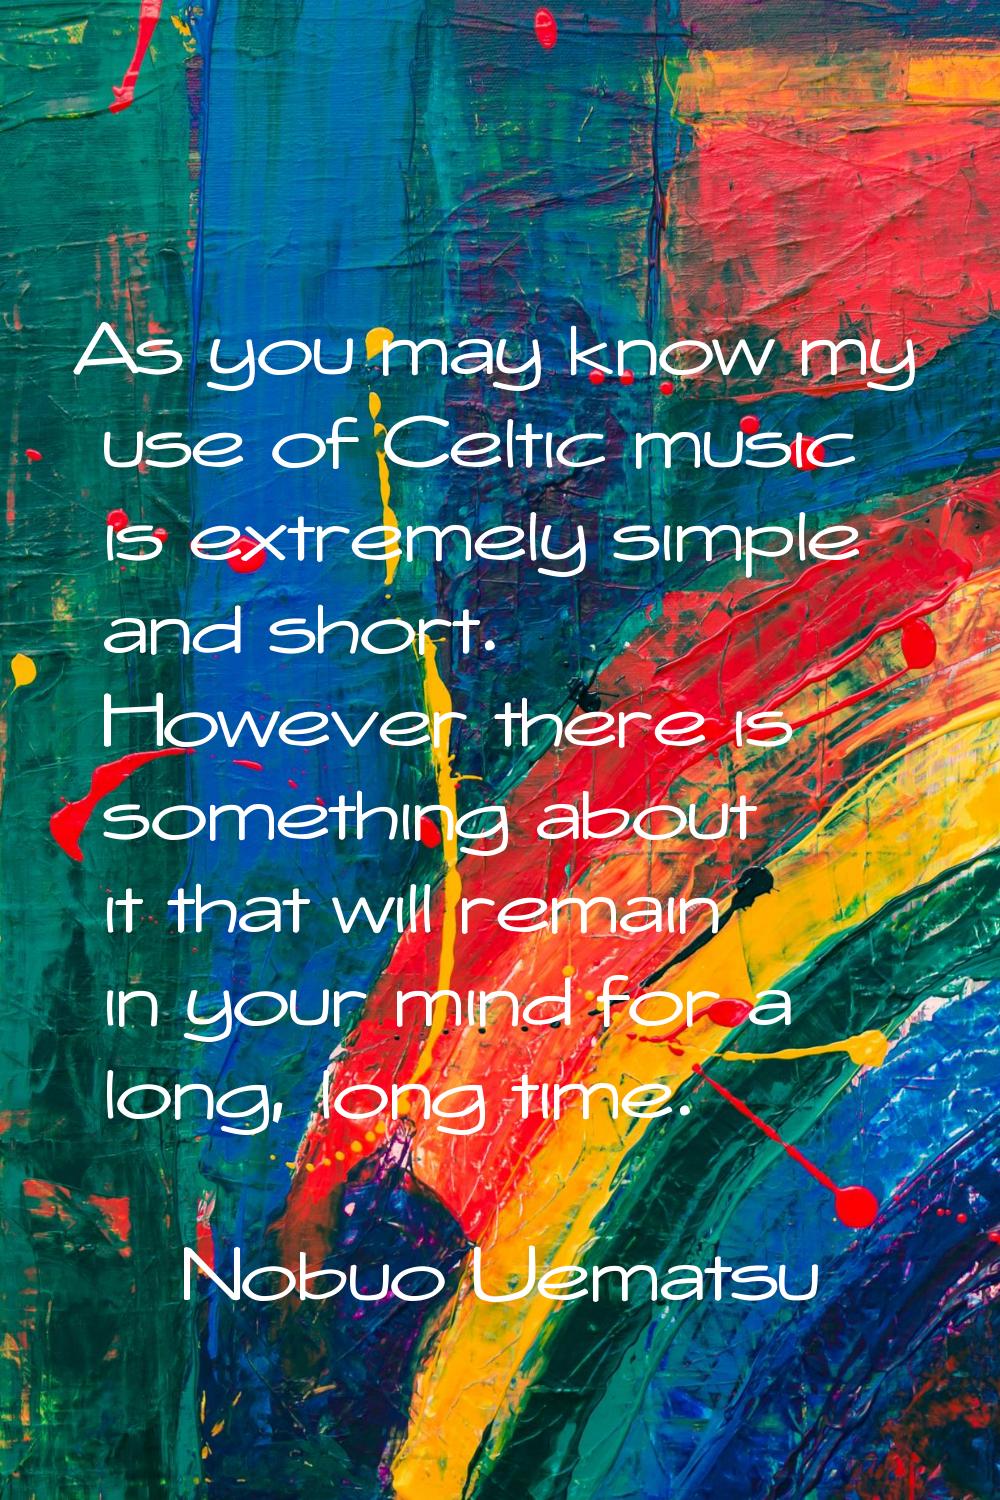 As you may know my use of Celtic music is extremely simple and short. However there is something ab